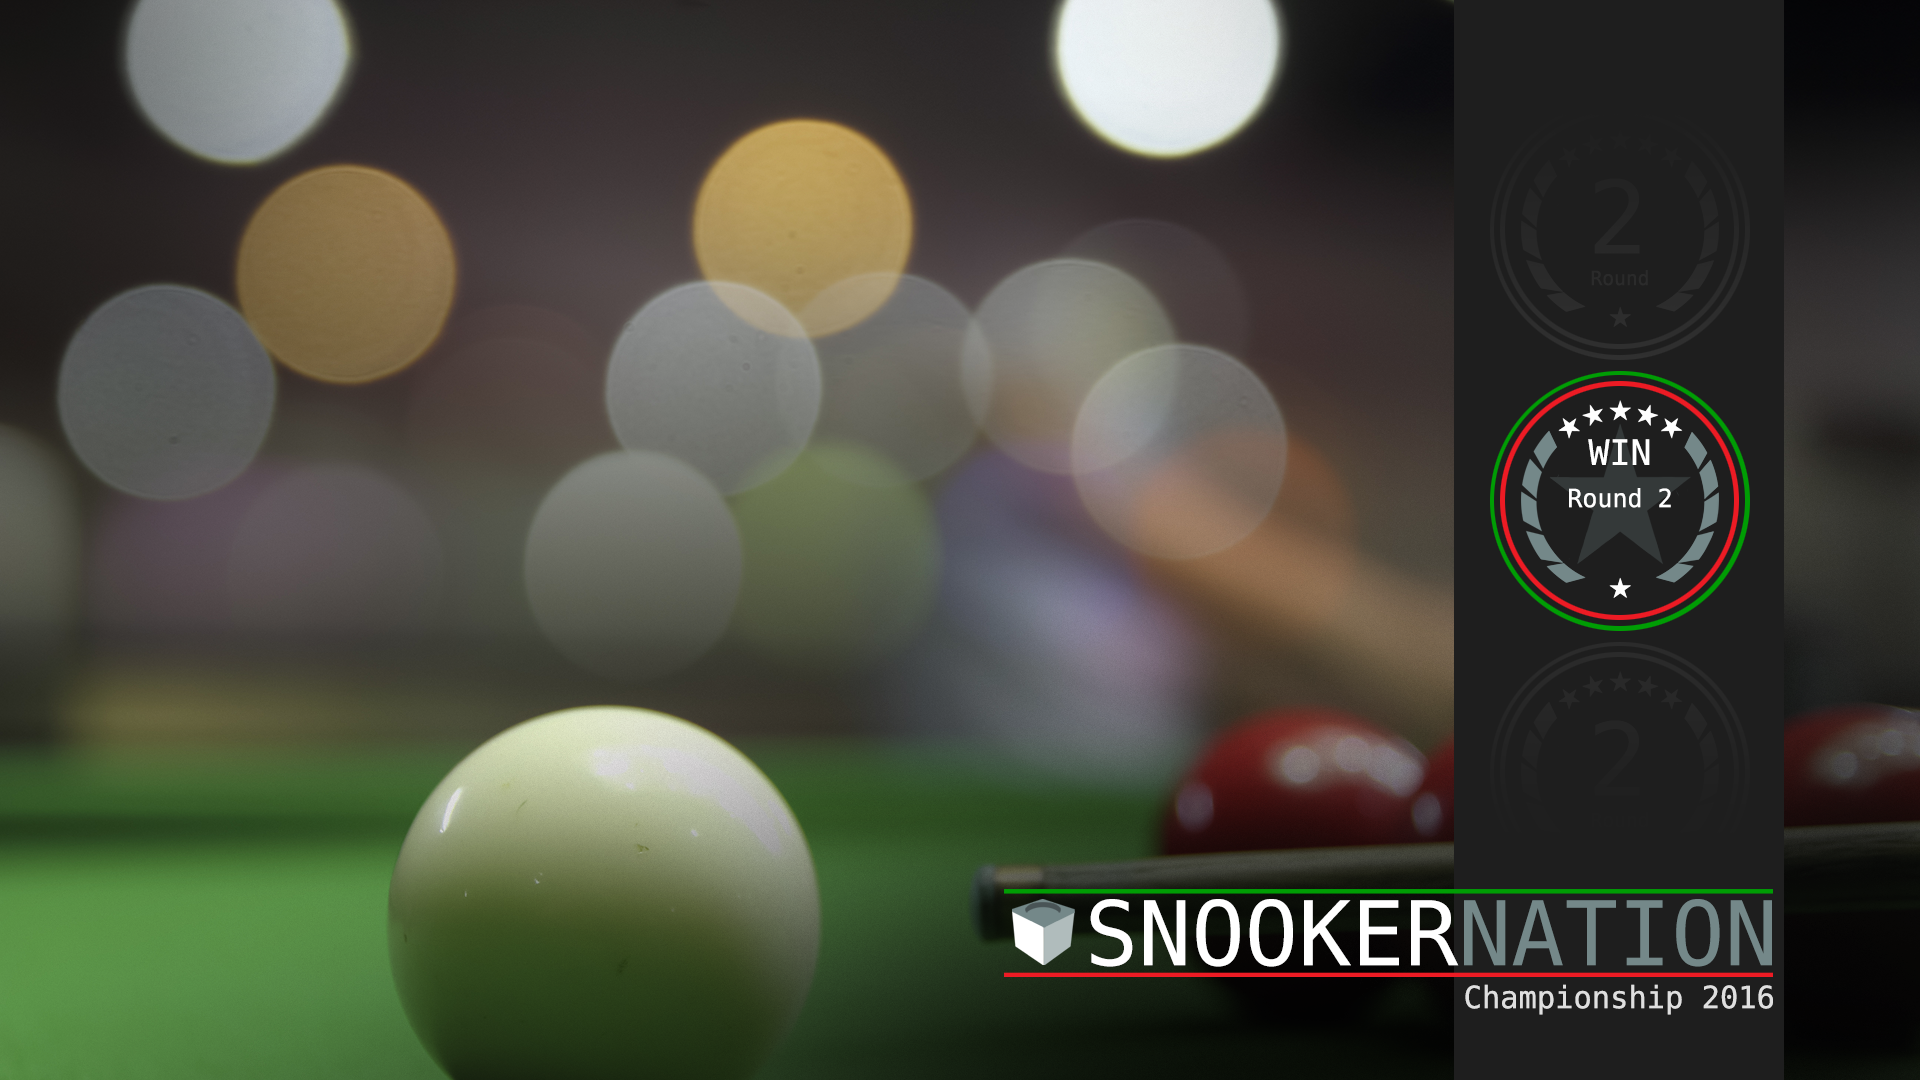 The Snooker Player Rises